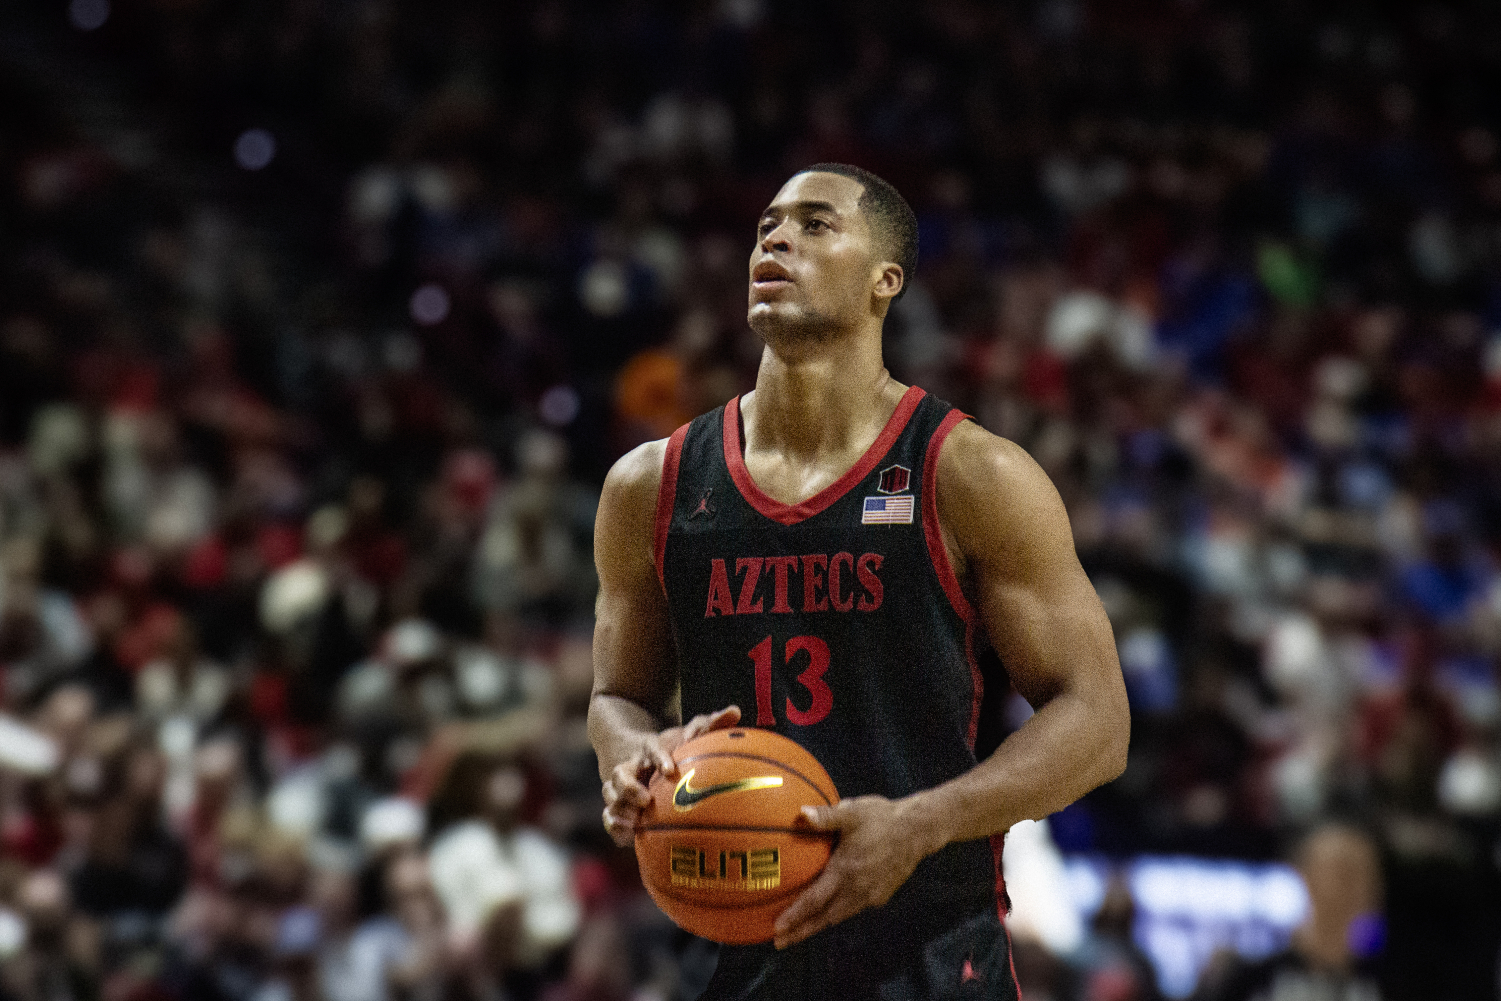 San Diego State forward Jaedon LeDee readies to take a free throw during the 2024 Mountain West Mens Championship Quarterfinals against UNLV on March 14. The senior has made 19 of his last 20 free throw attempts since that contest against the Runnin Rebels.